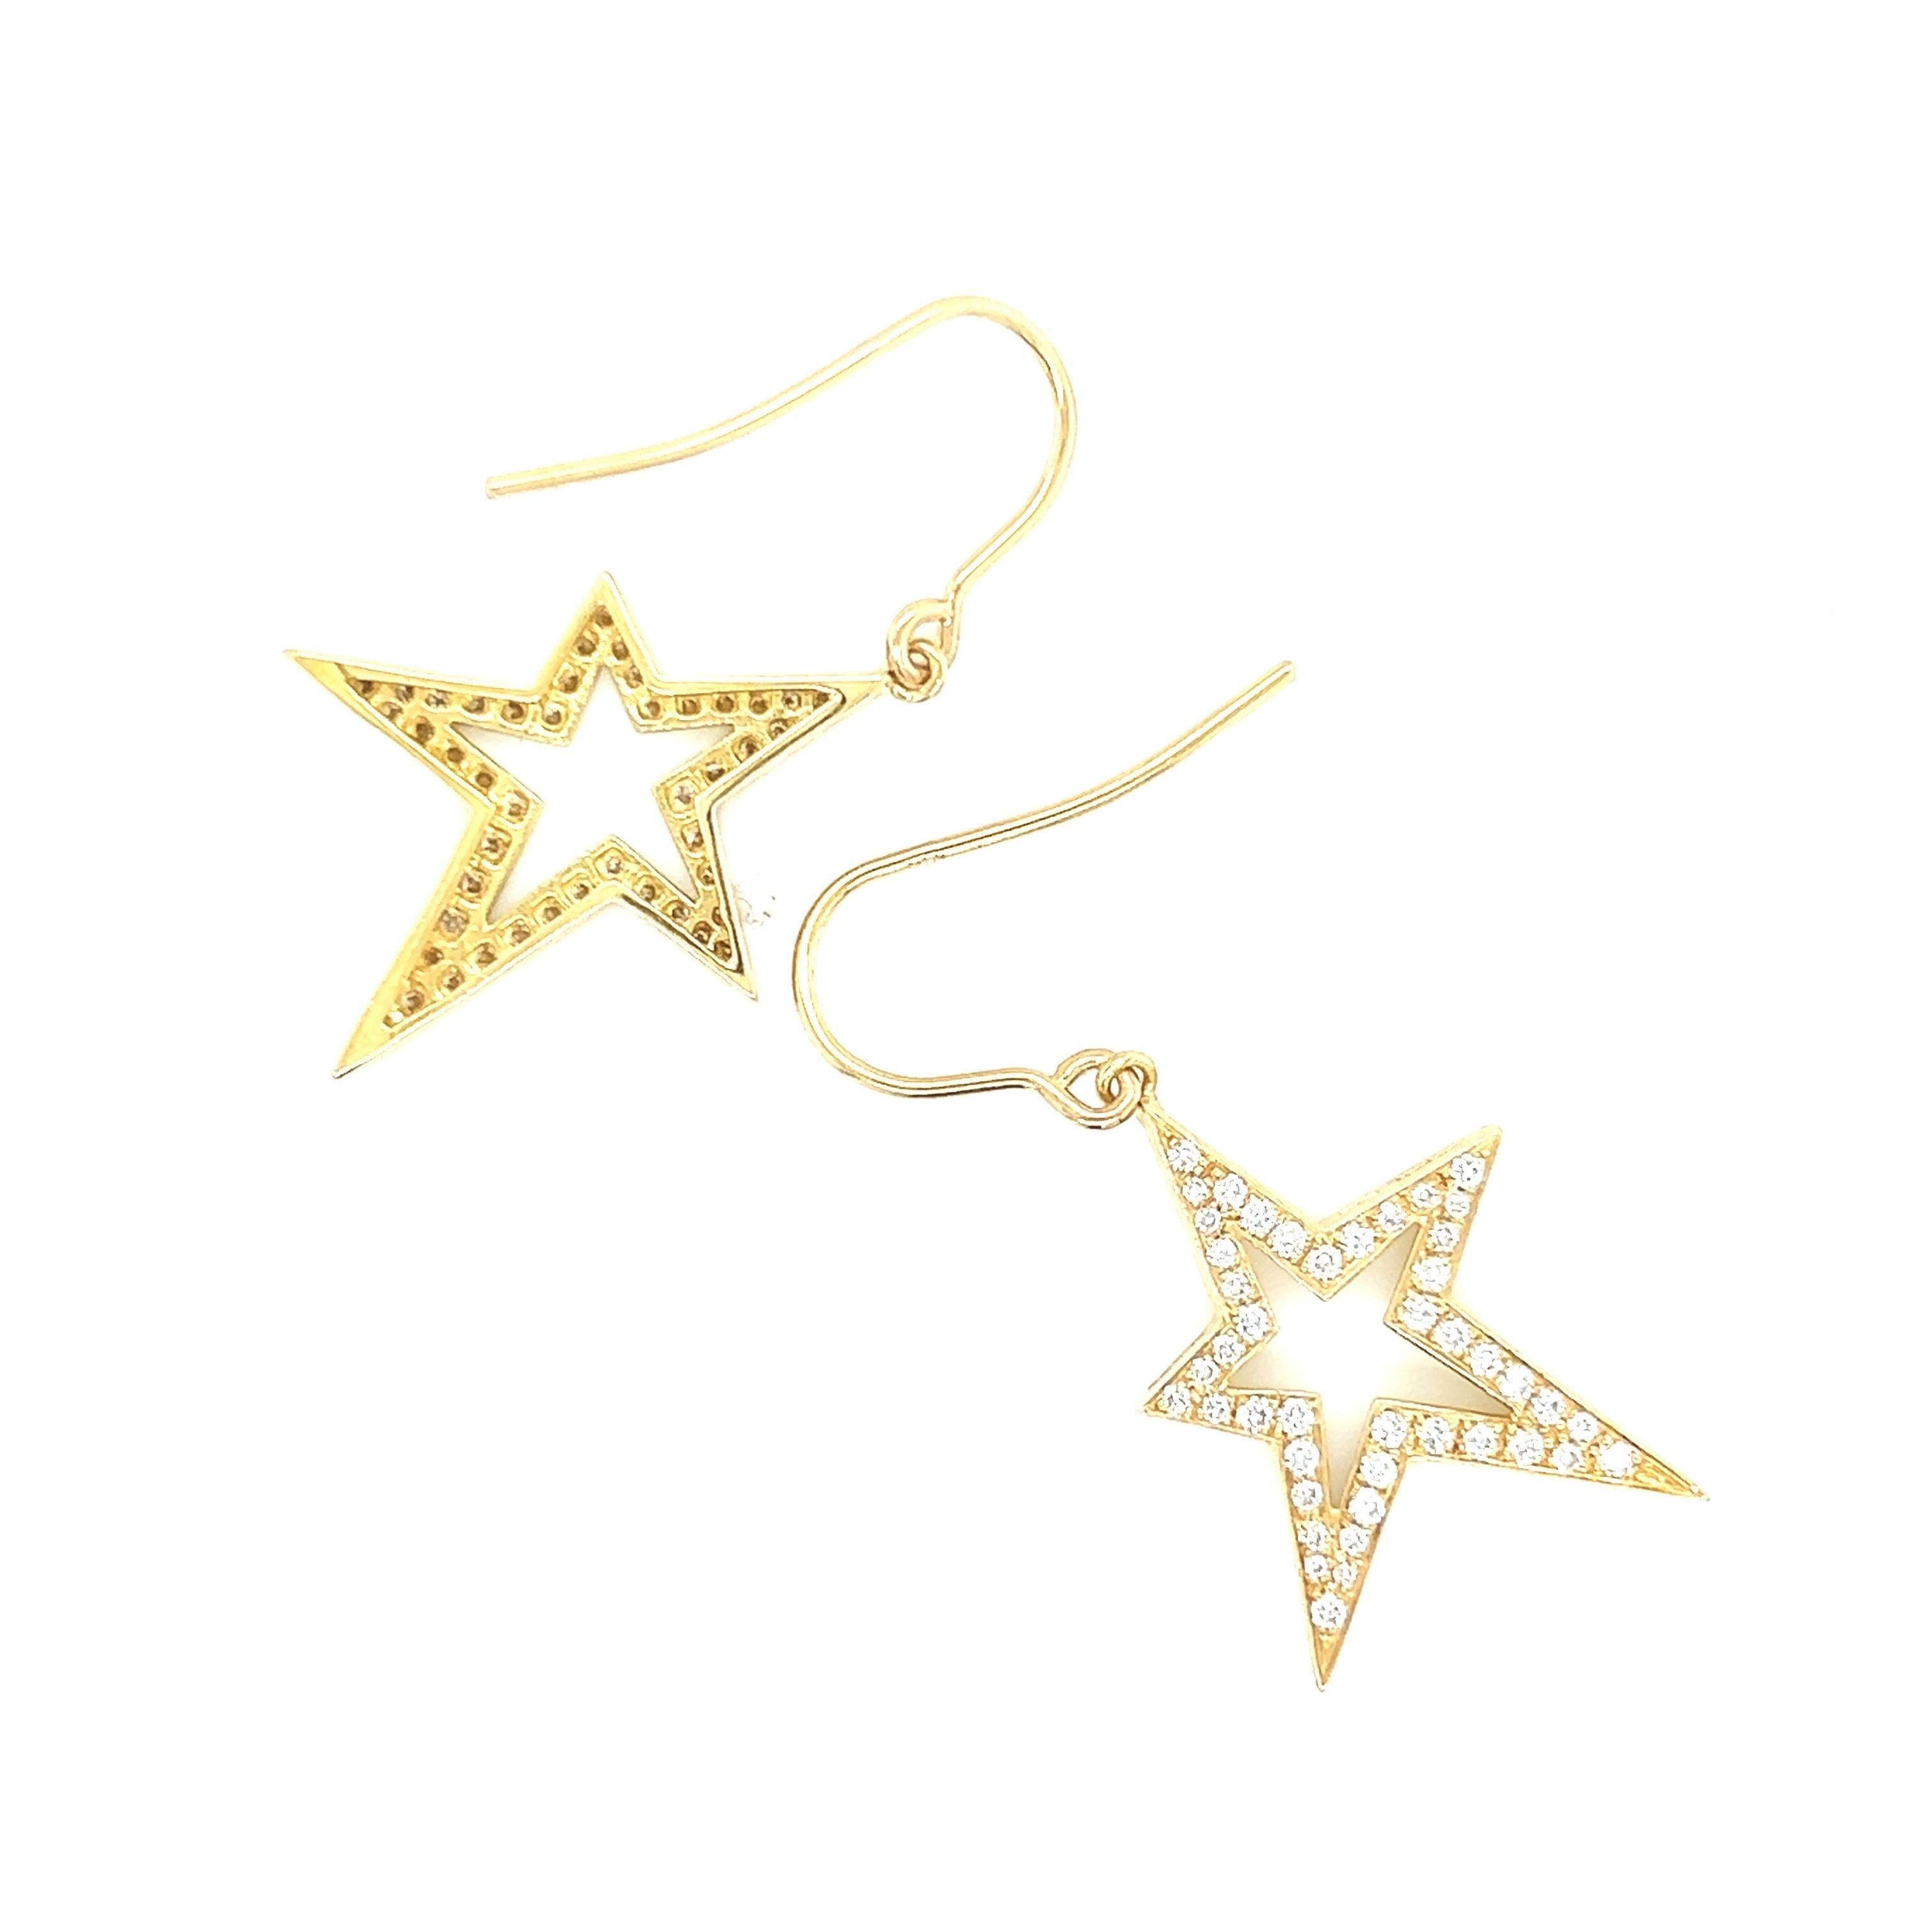 14k yellow gold and diamonds approx. 0.72tct star earrings.

Approx. length is 37mm.
